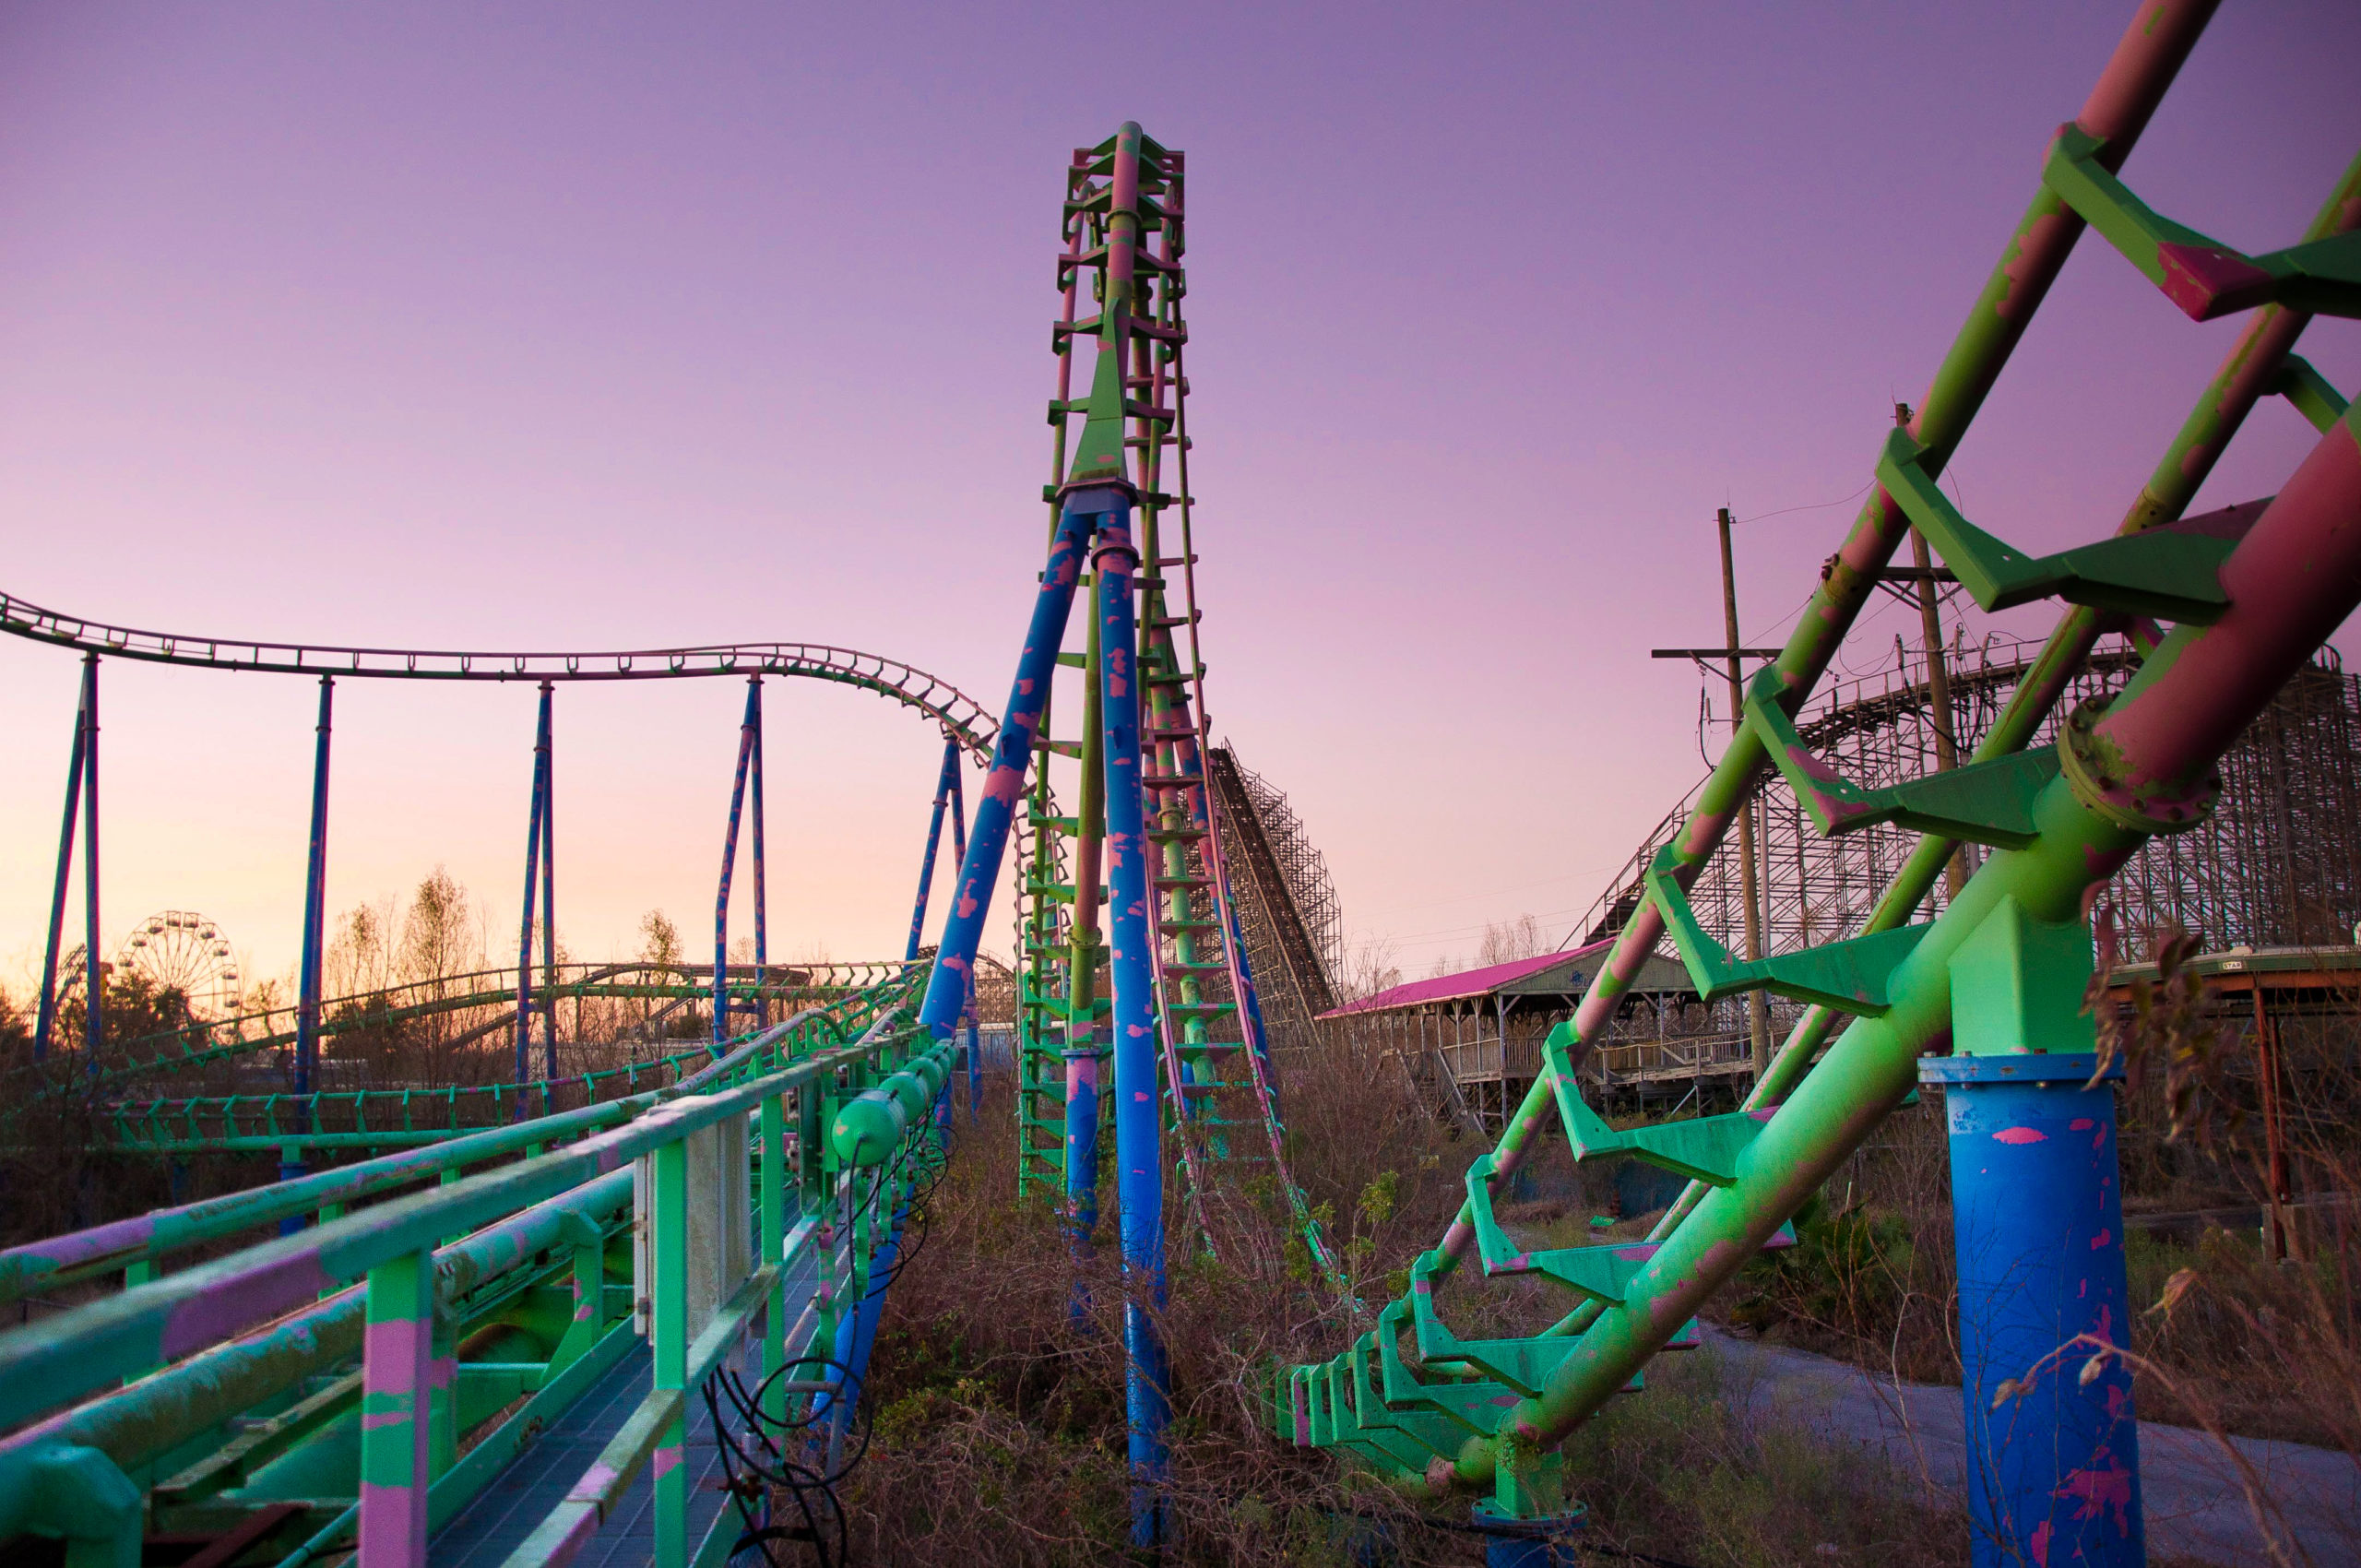 Eerie Images Of America’s Abandoned Amusement Parks Will Haunt You